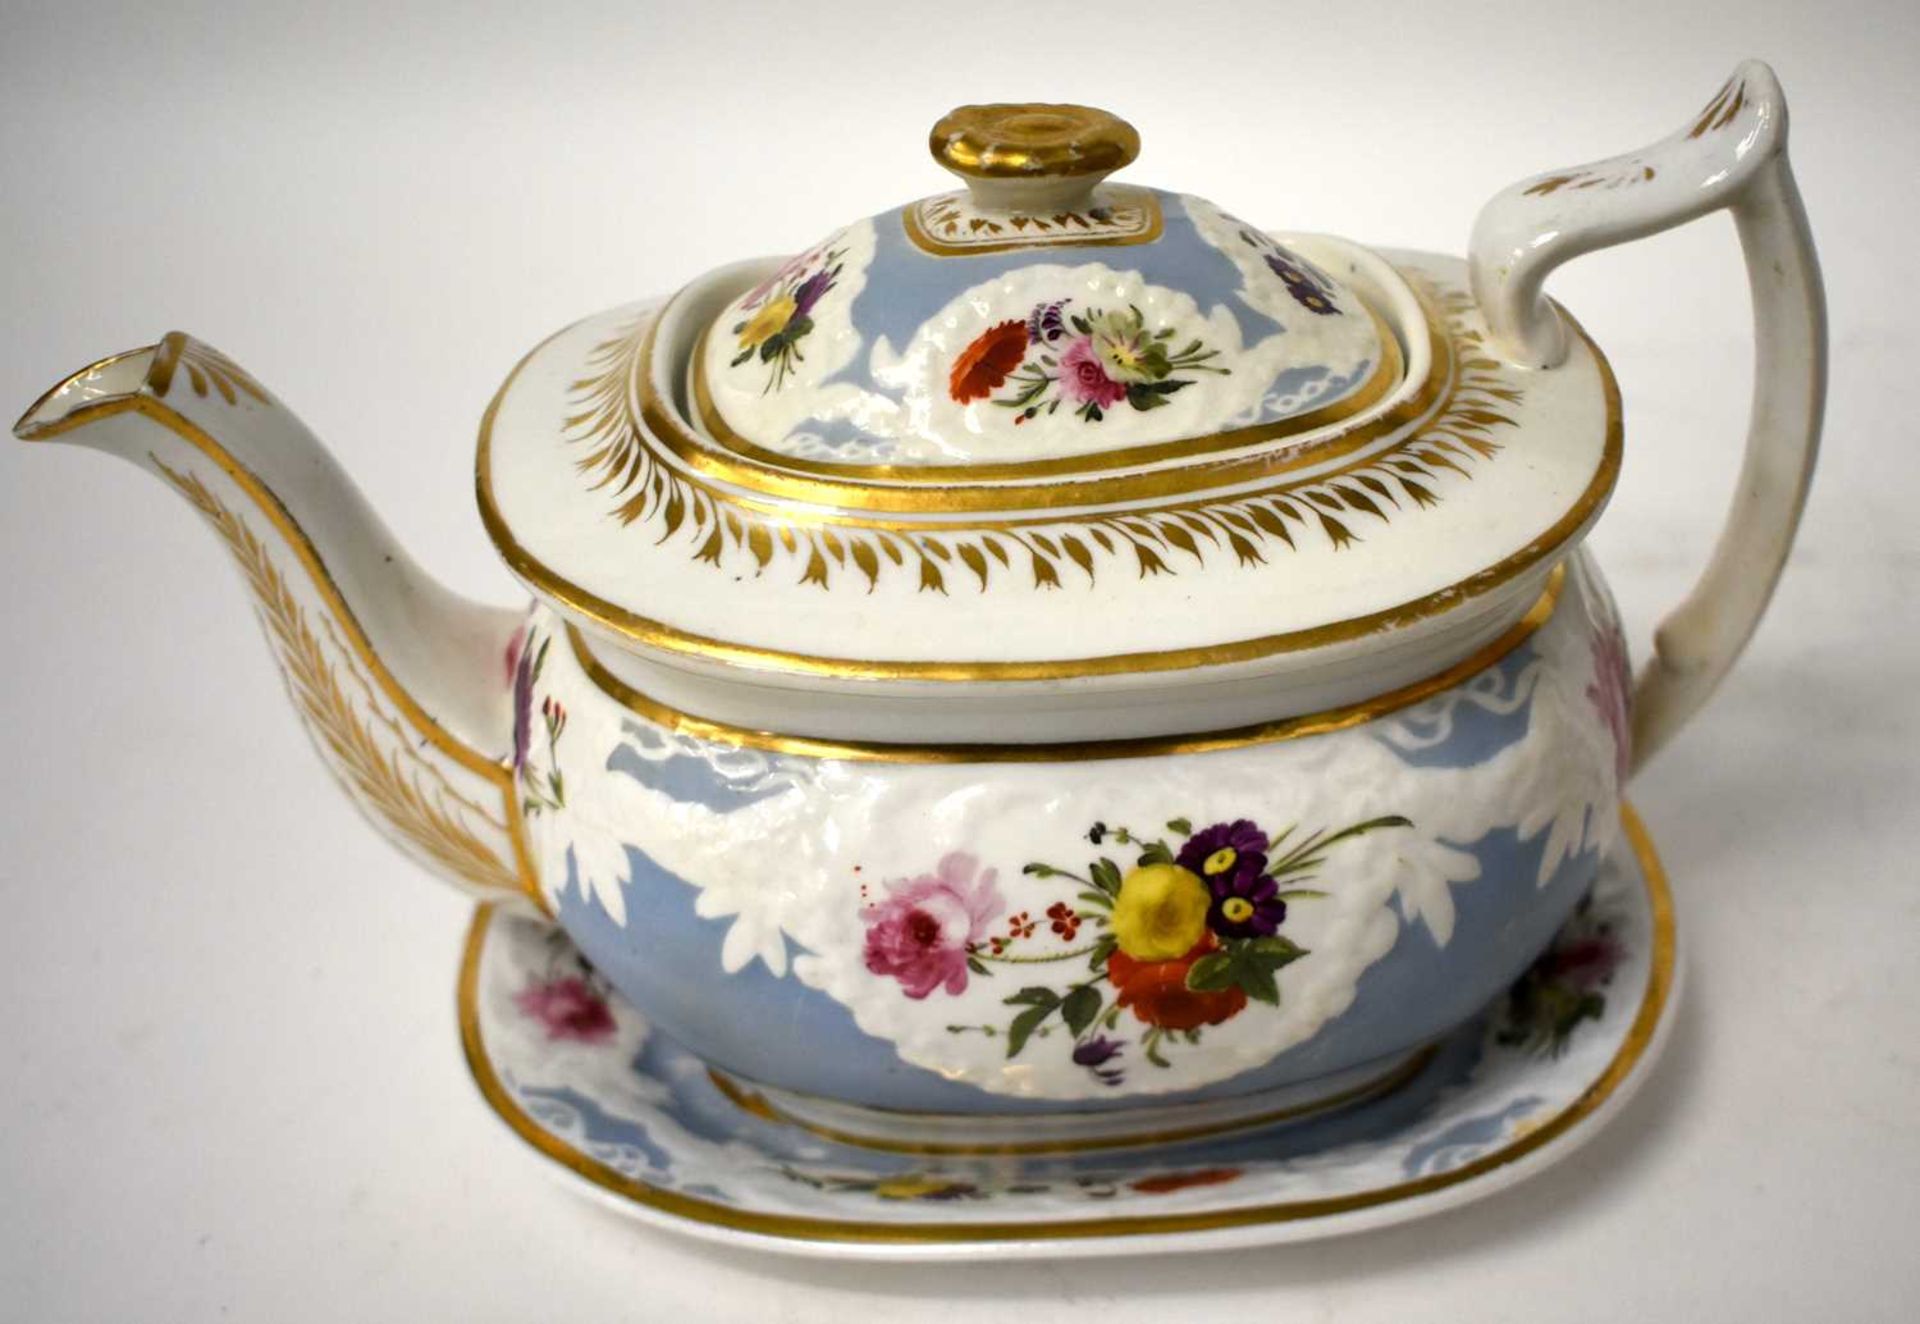 AN EARLY 19TH CENTURY CHAMBERLAINS WORCESTER PART TEASET painted with floral sprays, under a moulded - Image 26 of 36